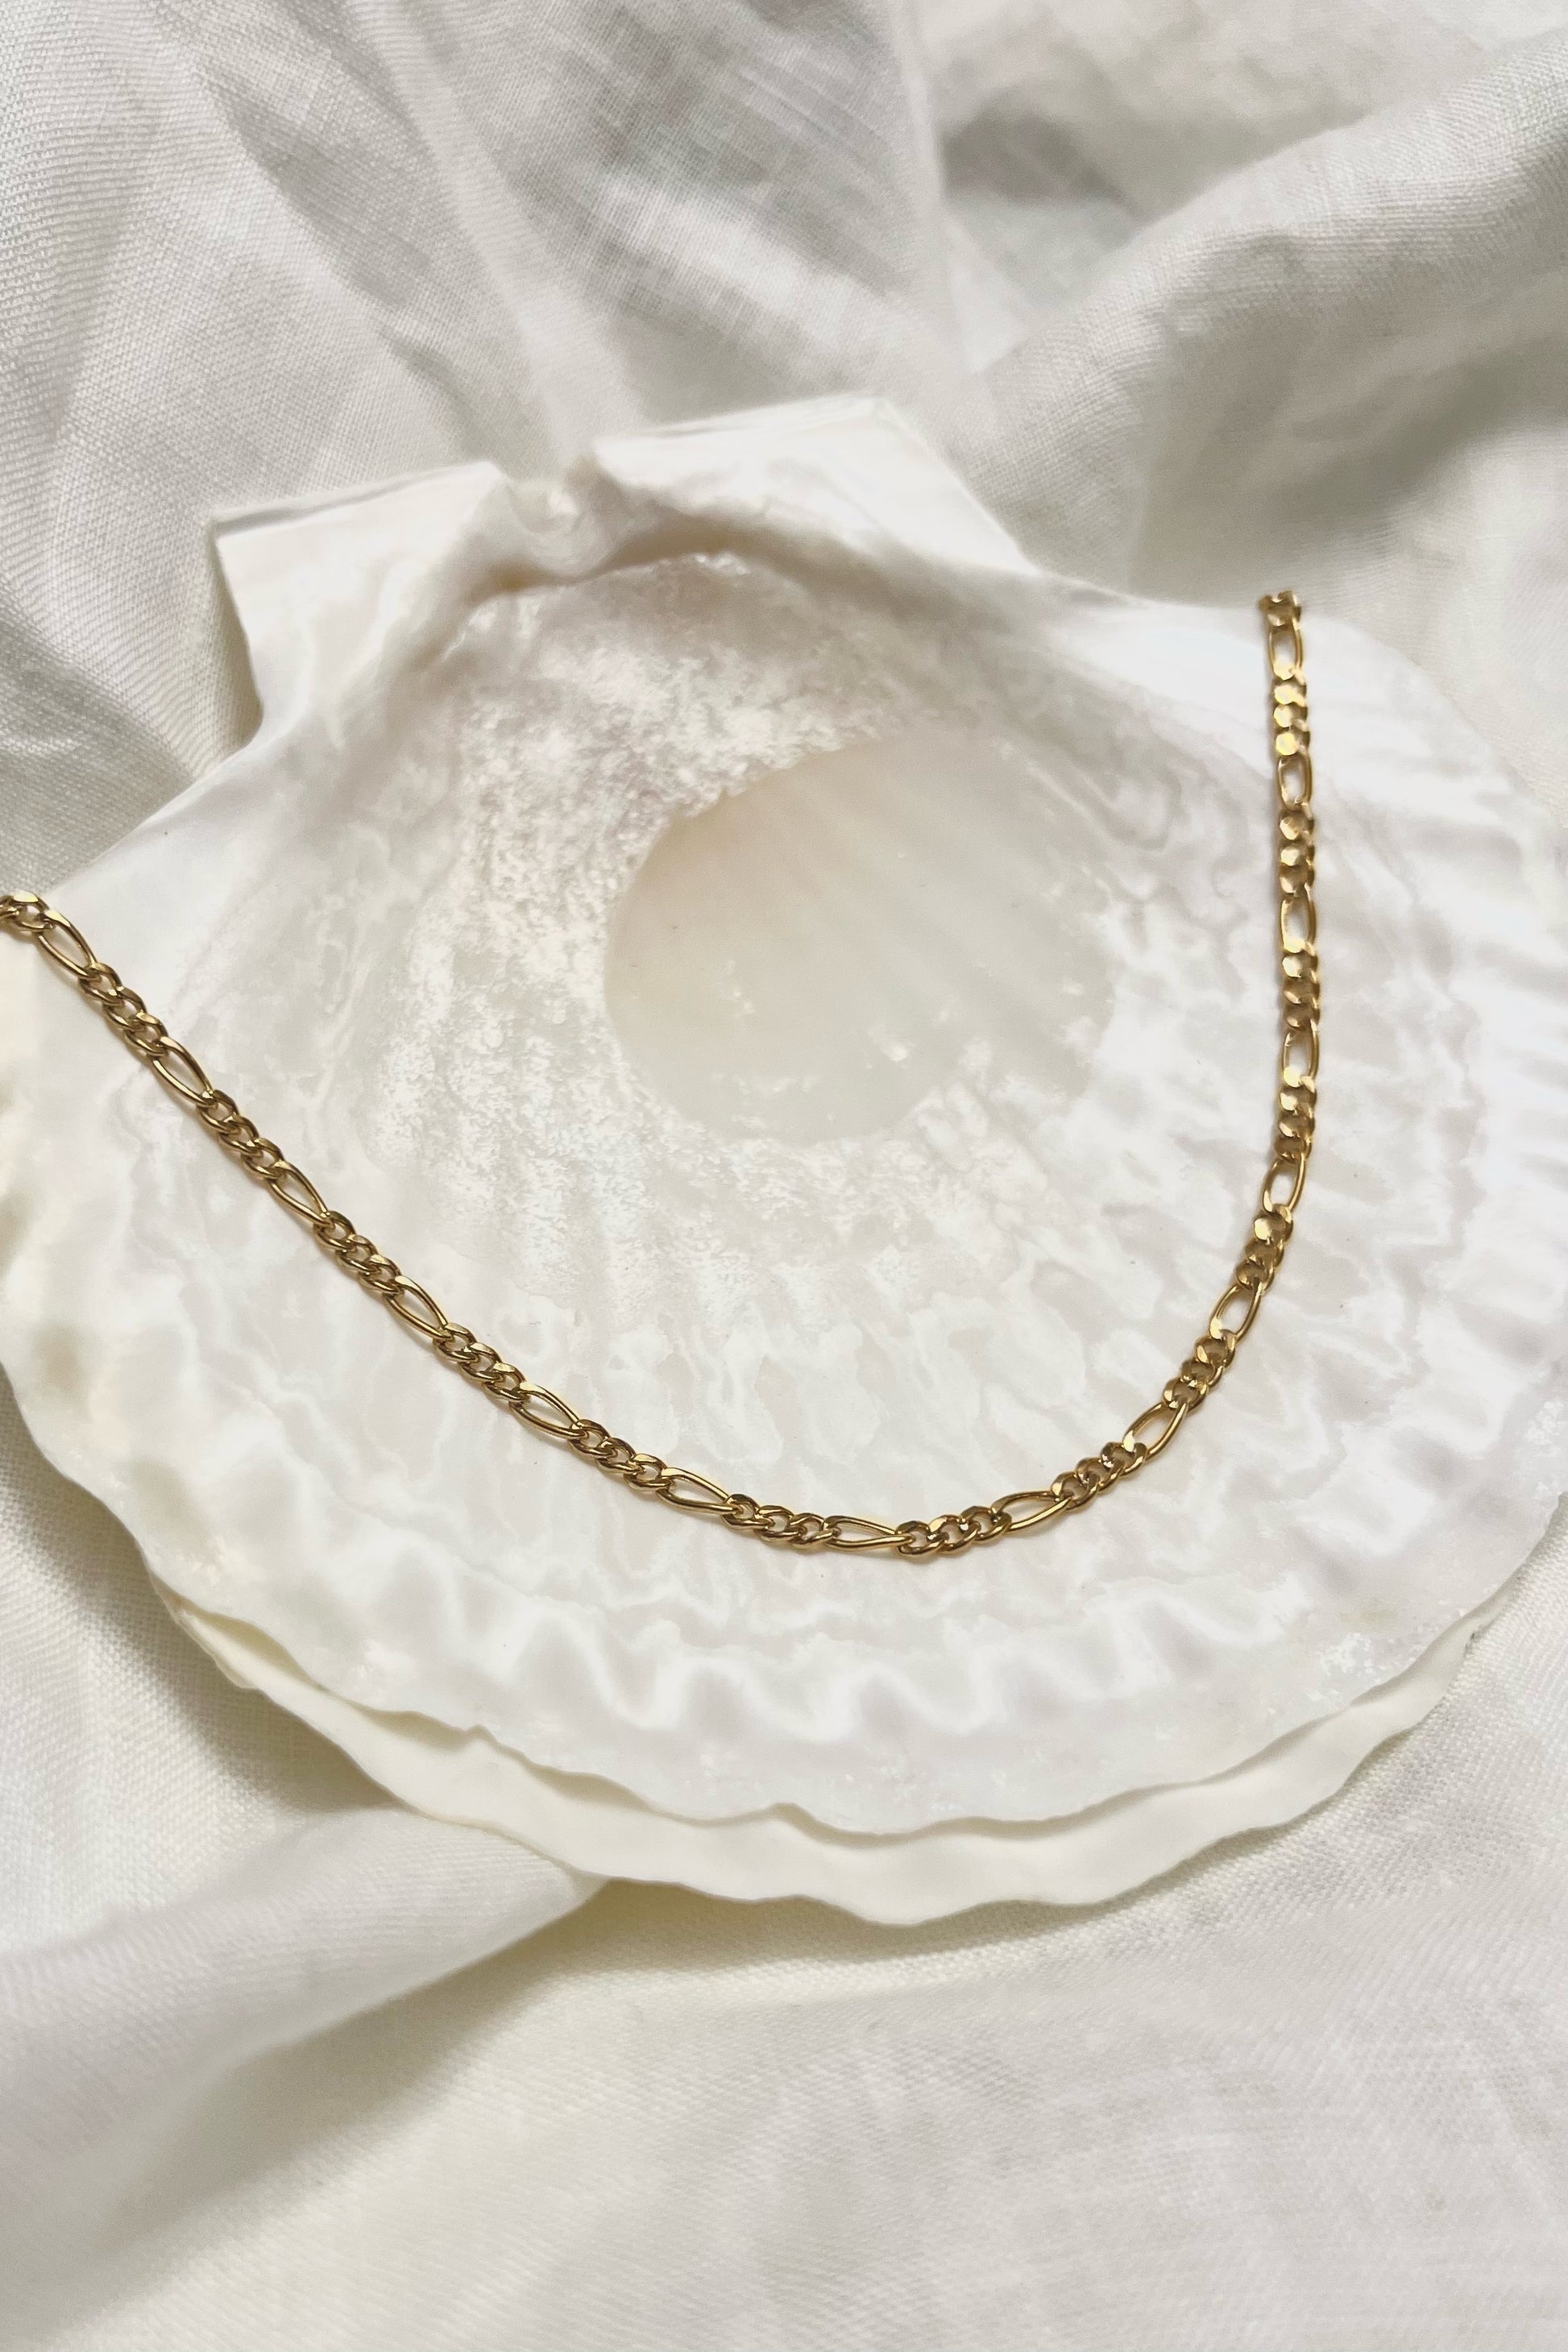 A styled photo of the necklace on top of a white shell and white linen background.